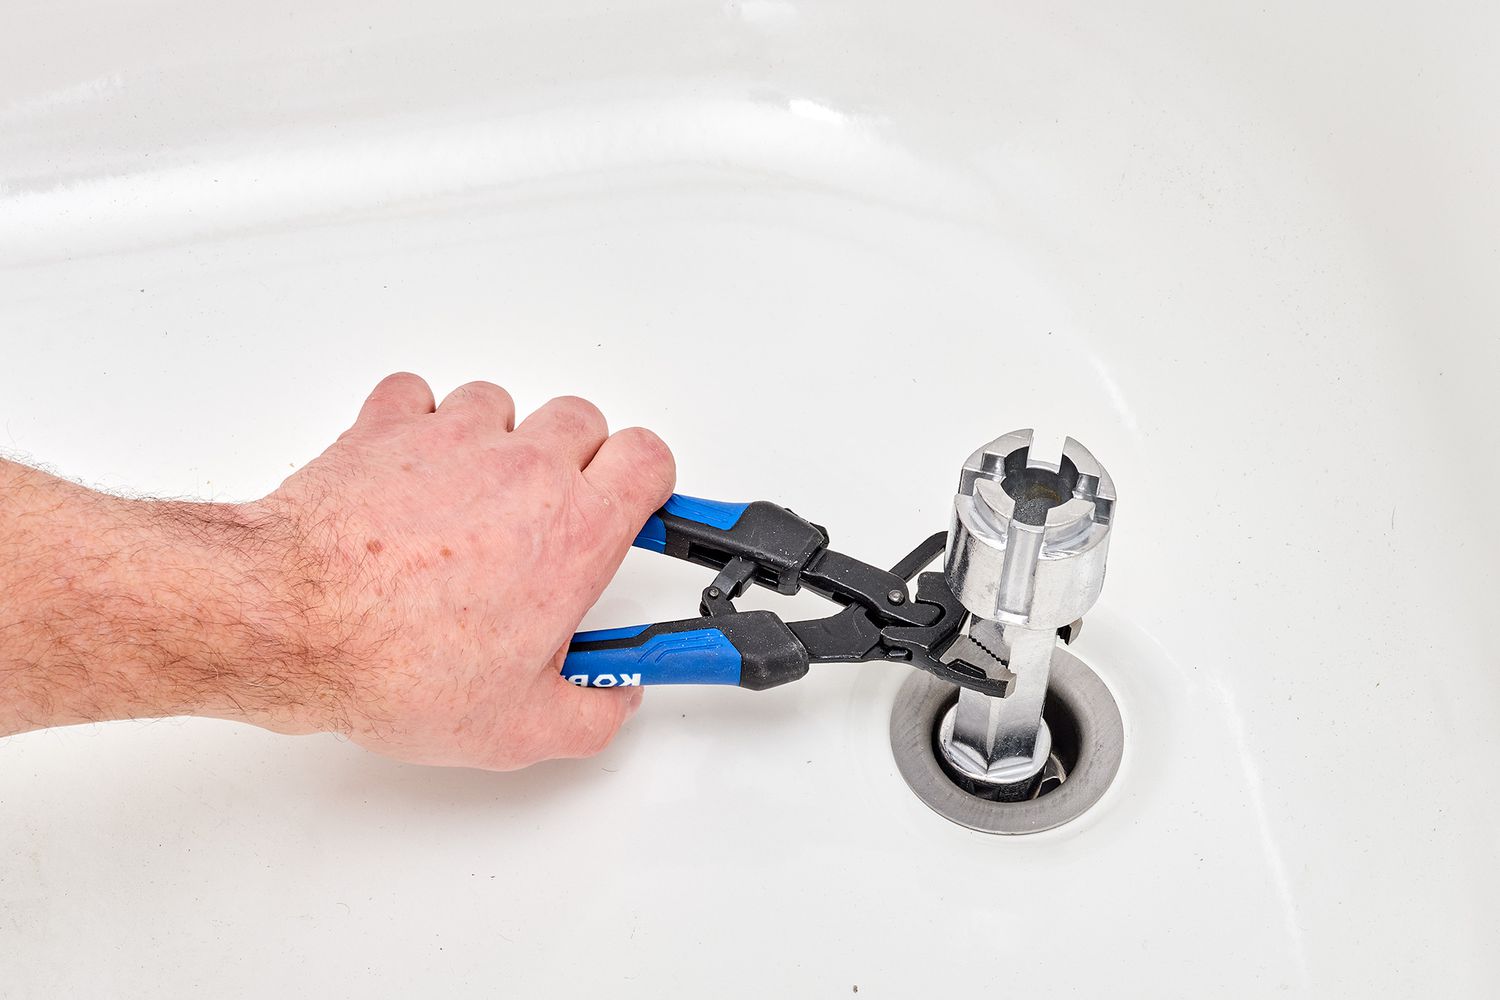 Adjustable wrench pulling out old drain fitting from bathtub